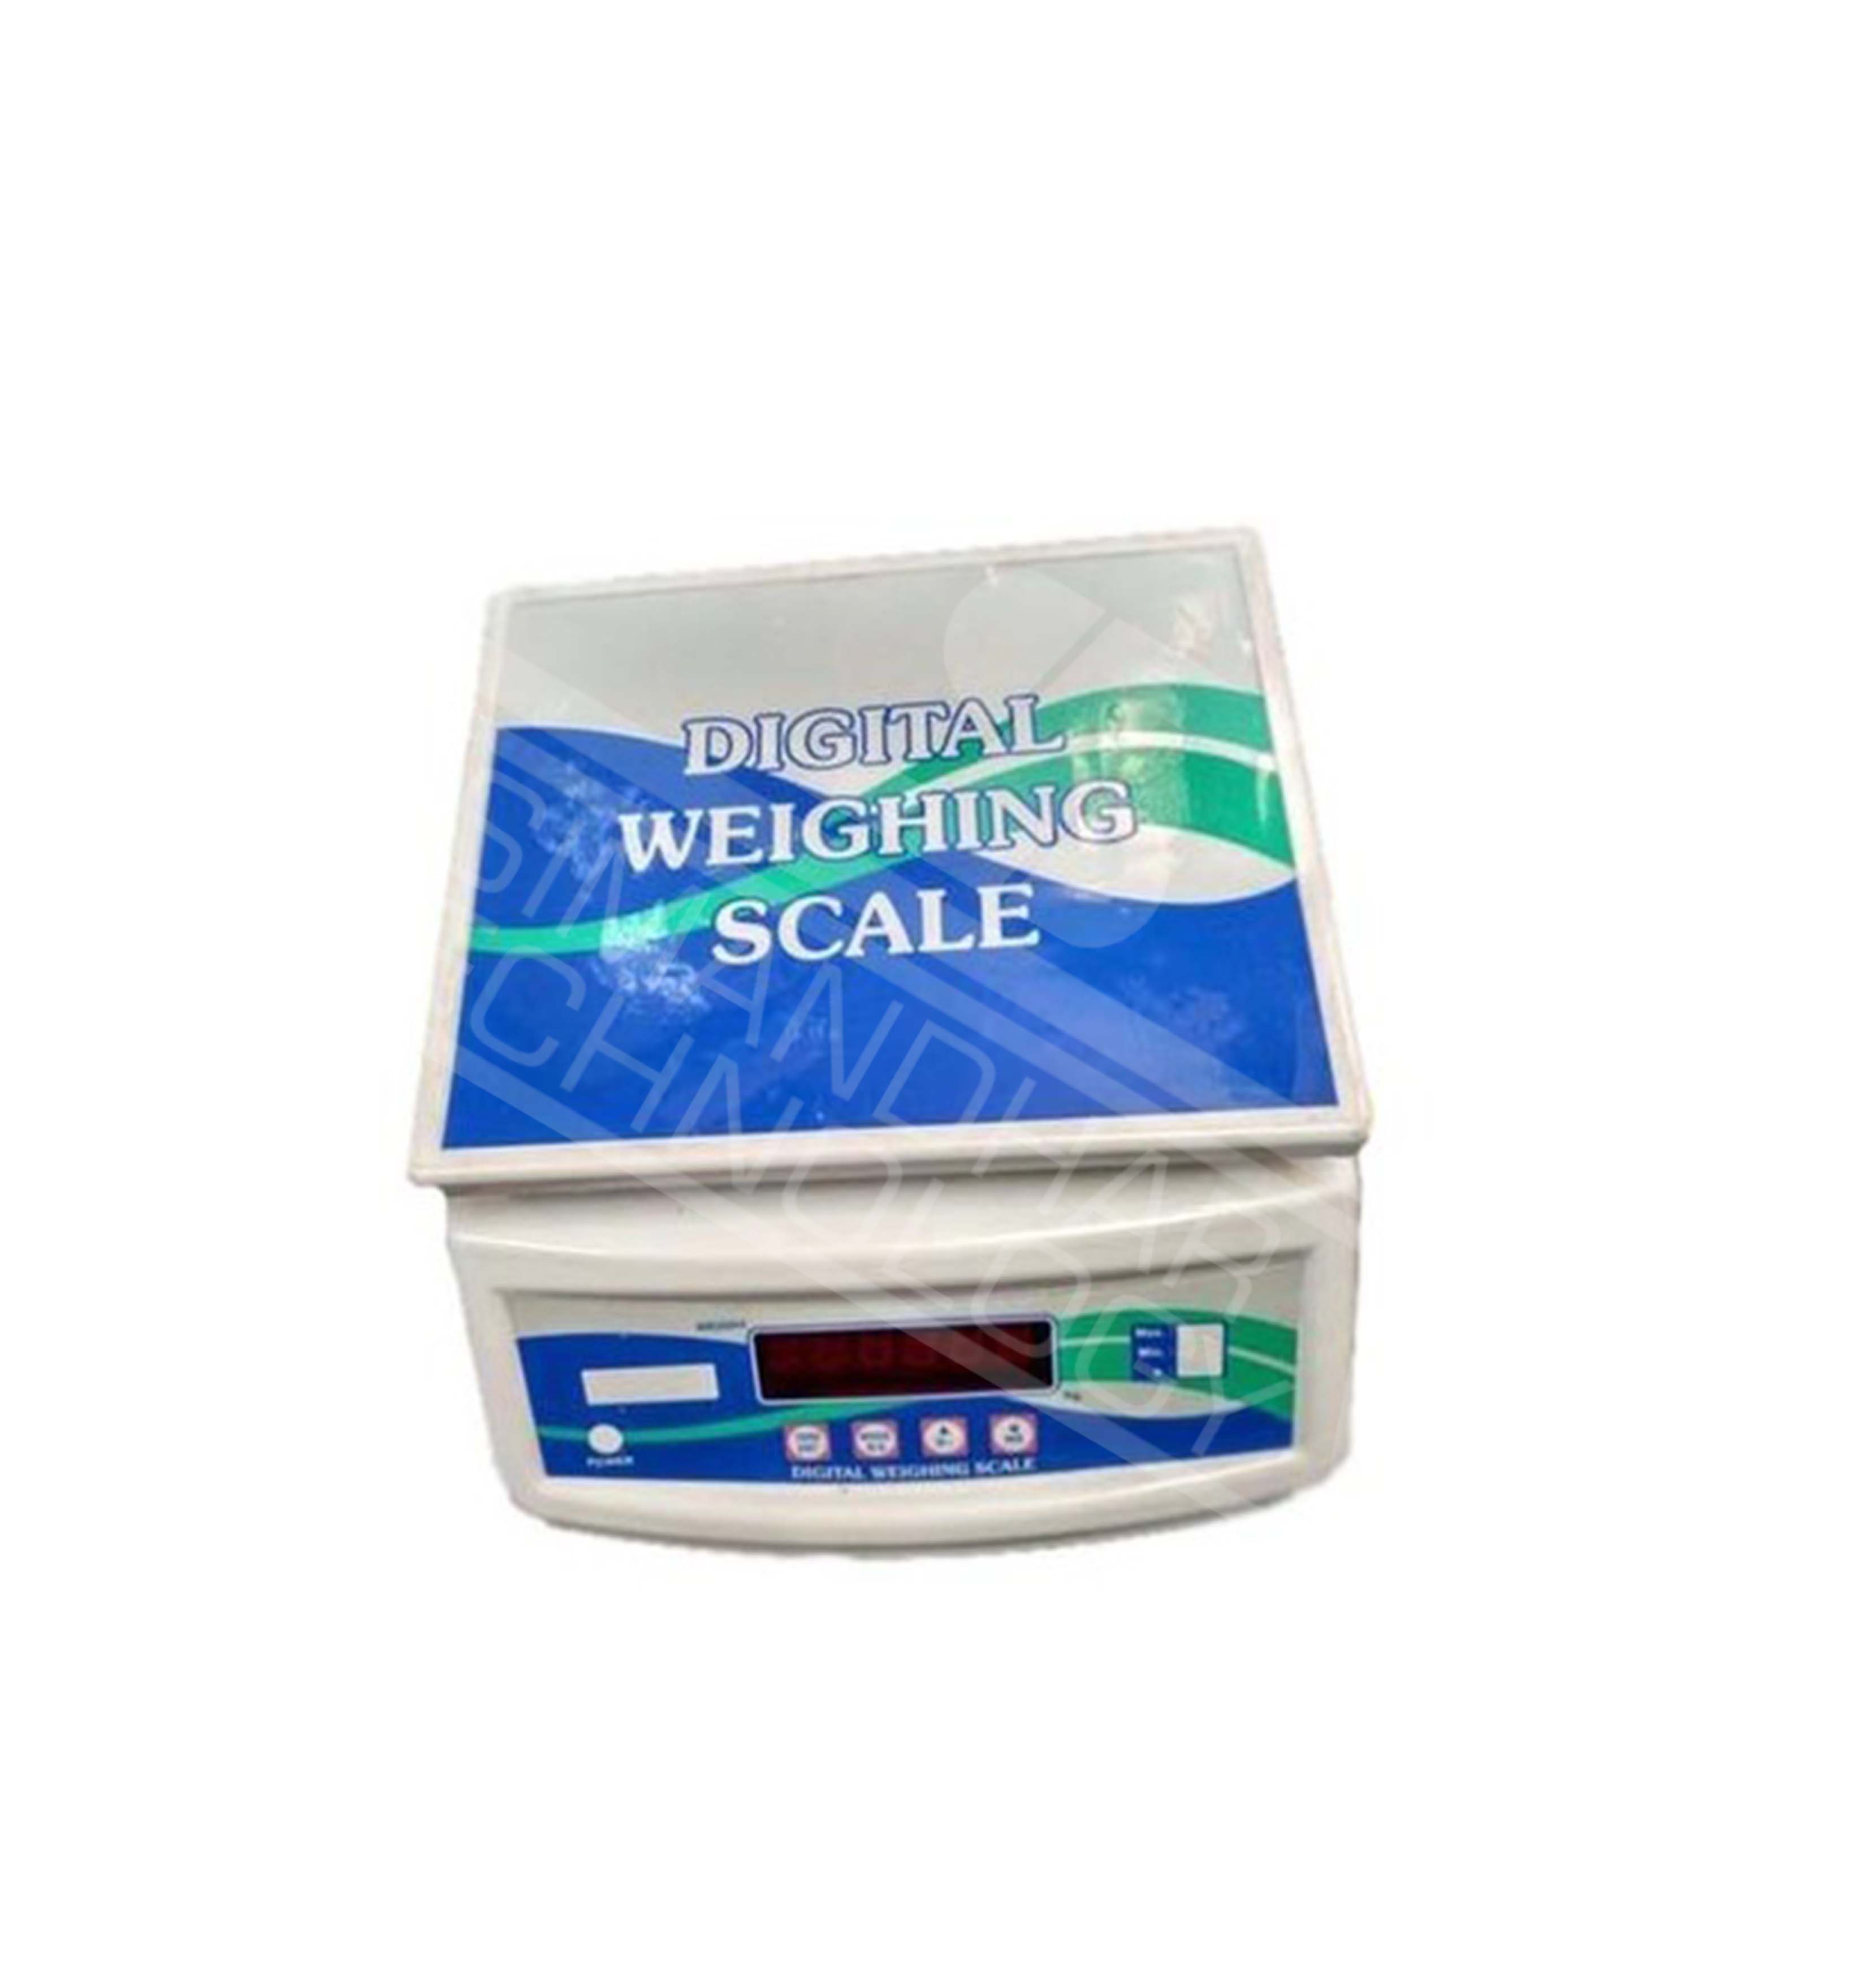 Jewellery Weighing Scale Manufacturer in Agra